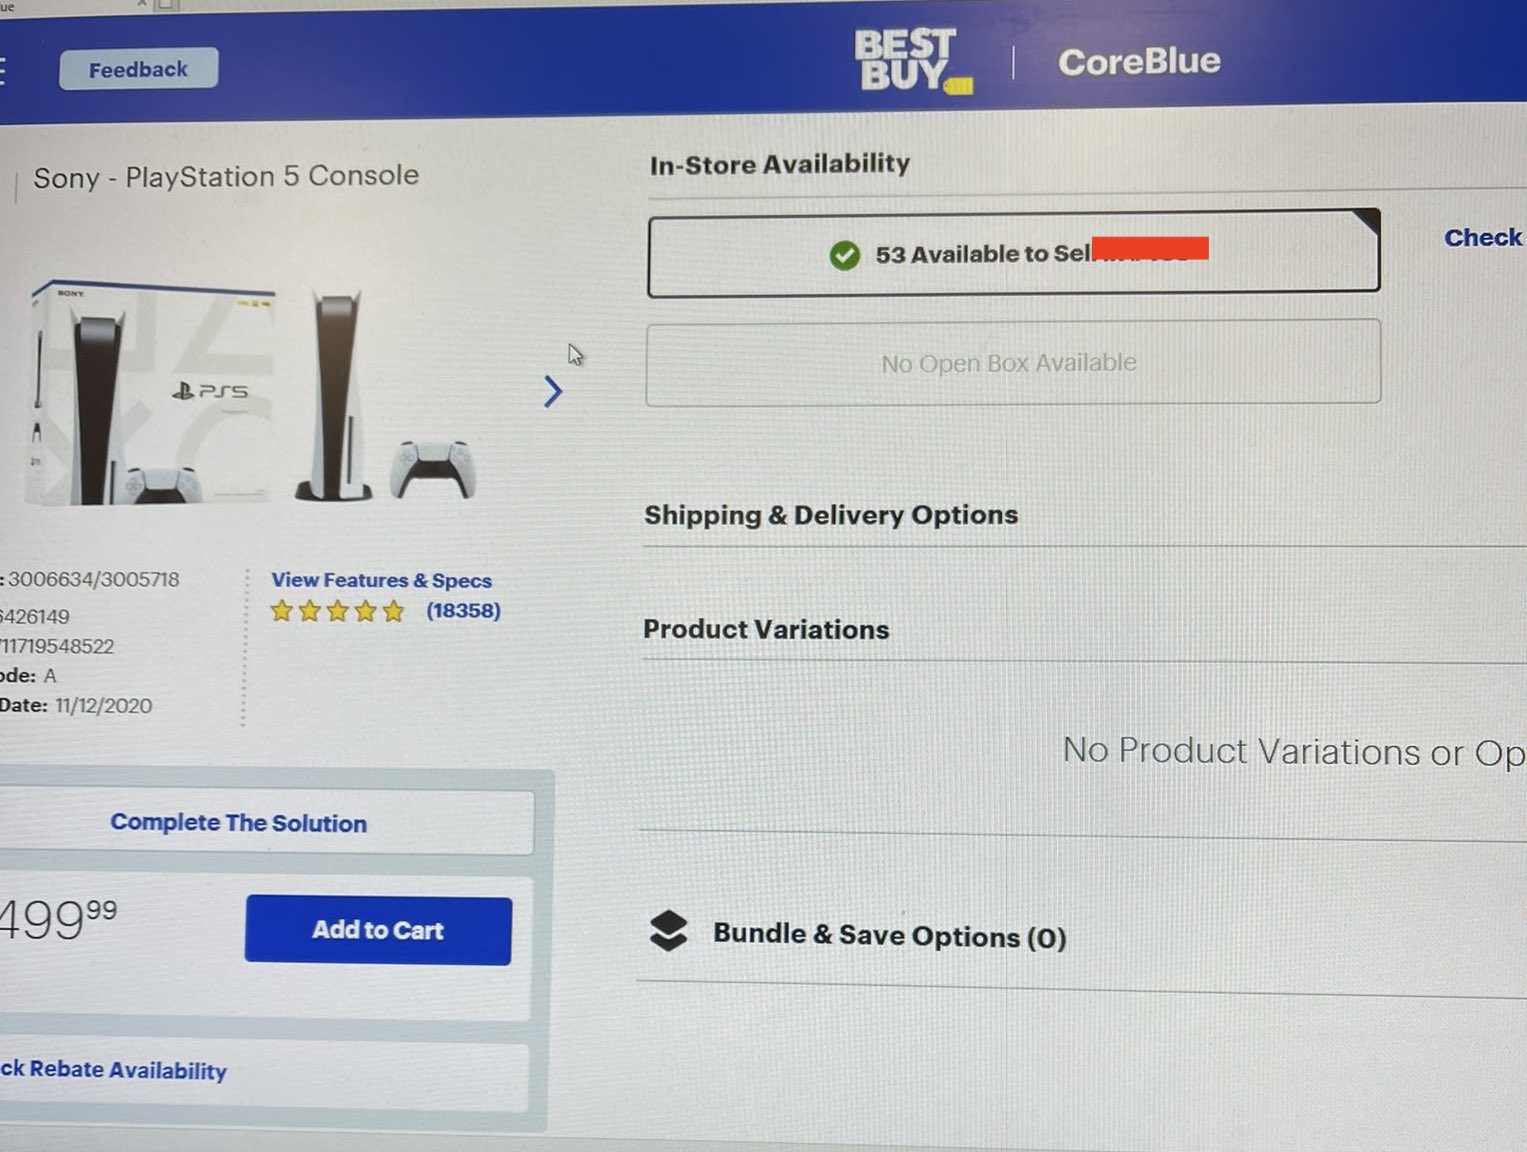 PS5 restock at Best Buy inventory screen